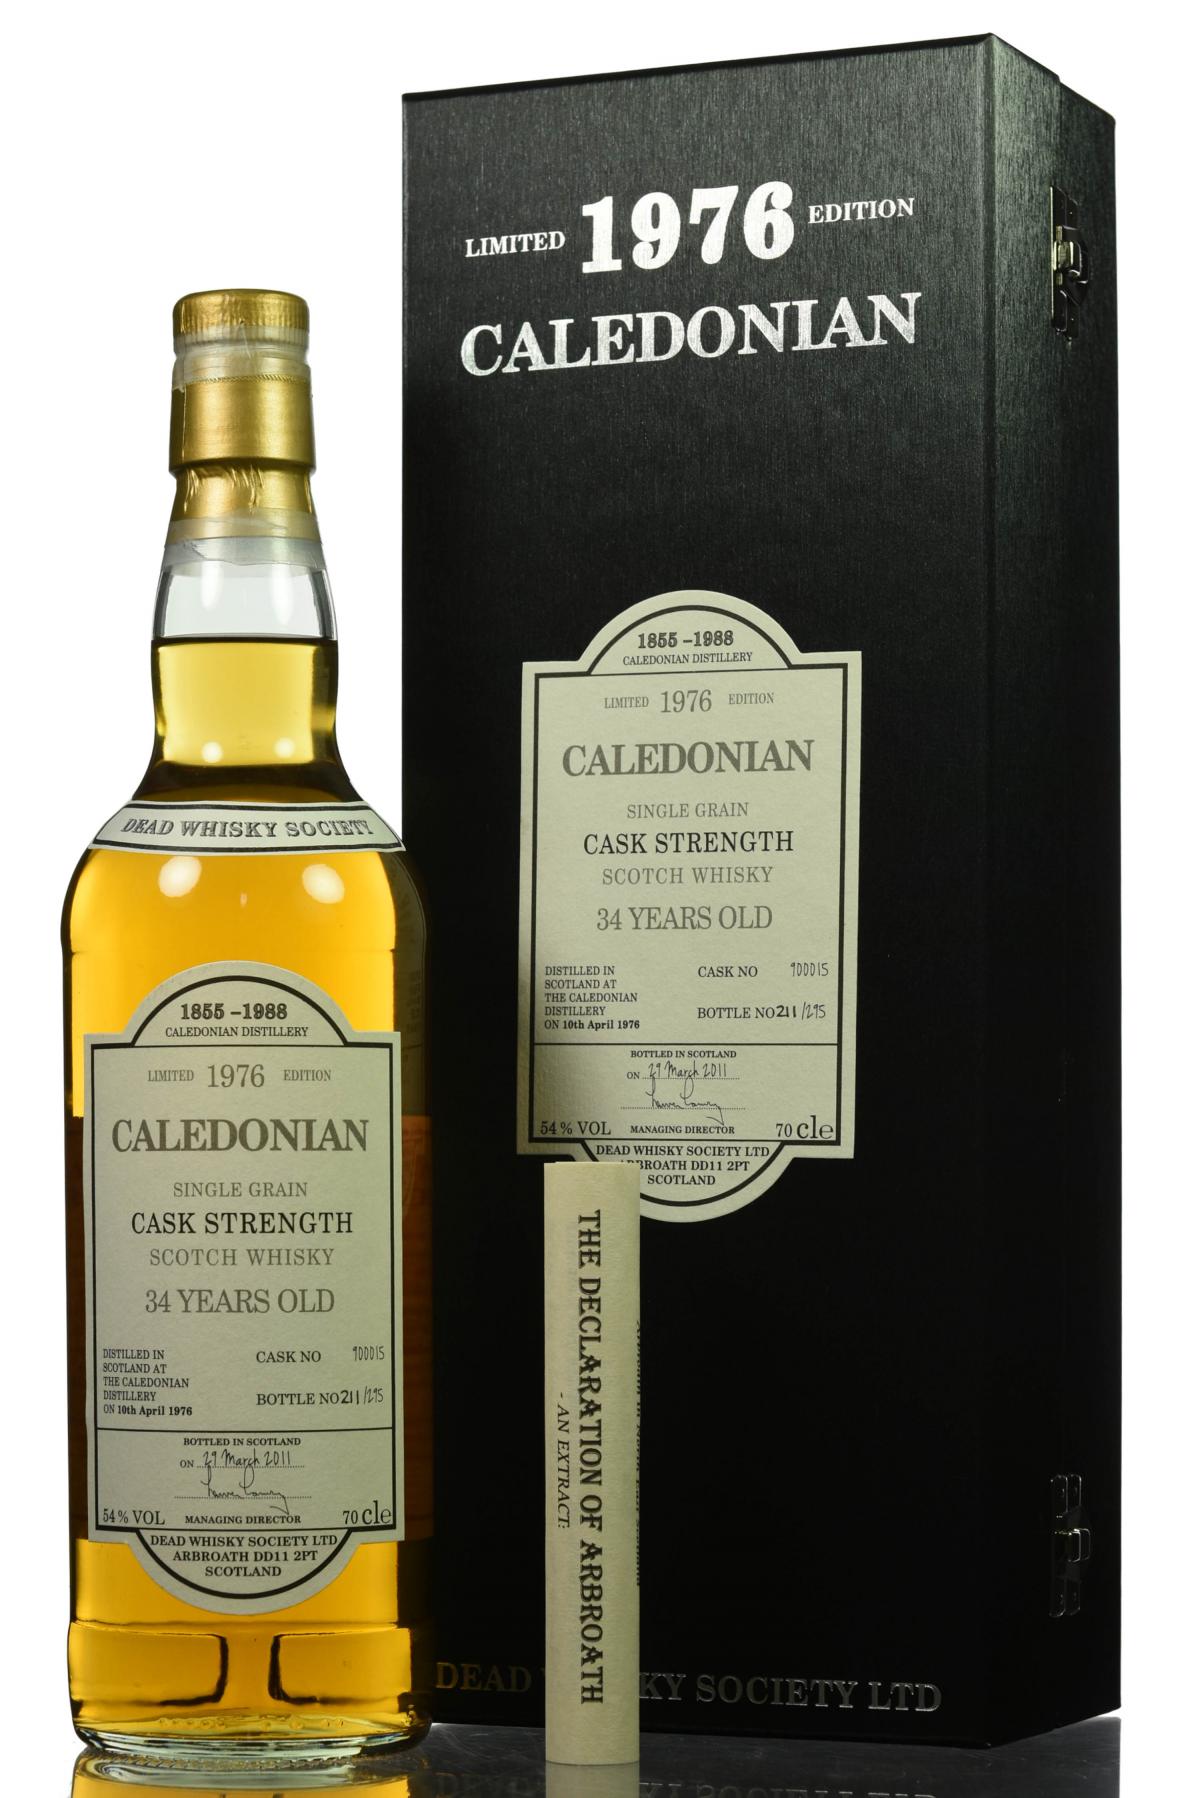 Caledonian 1976-2011 - 34 Year Old - Dead Whisky Society